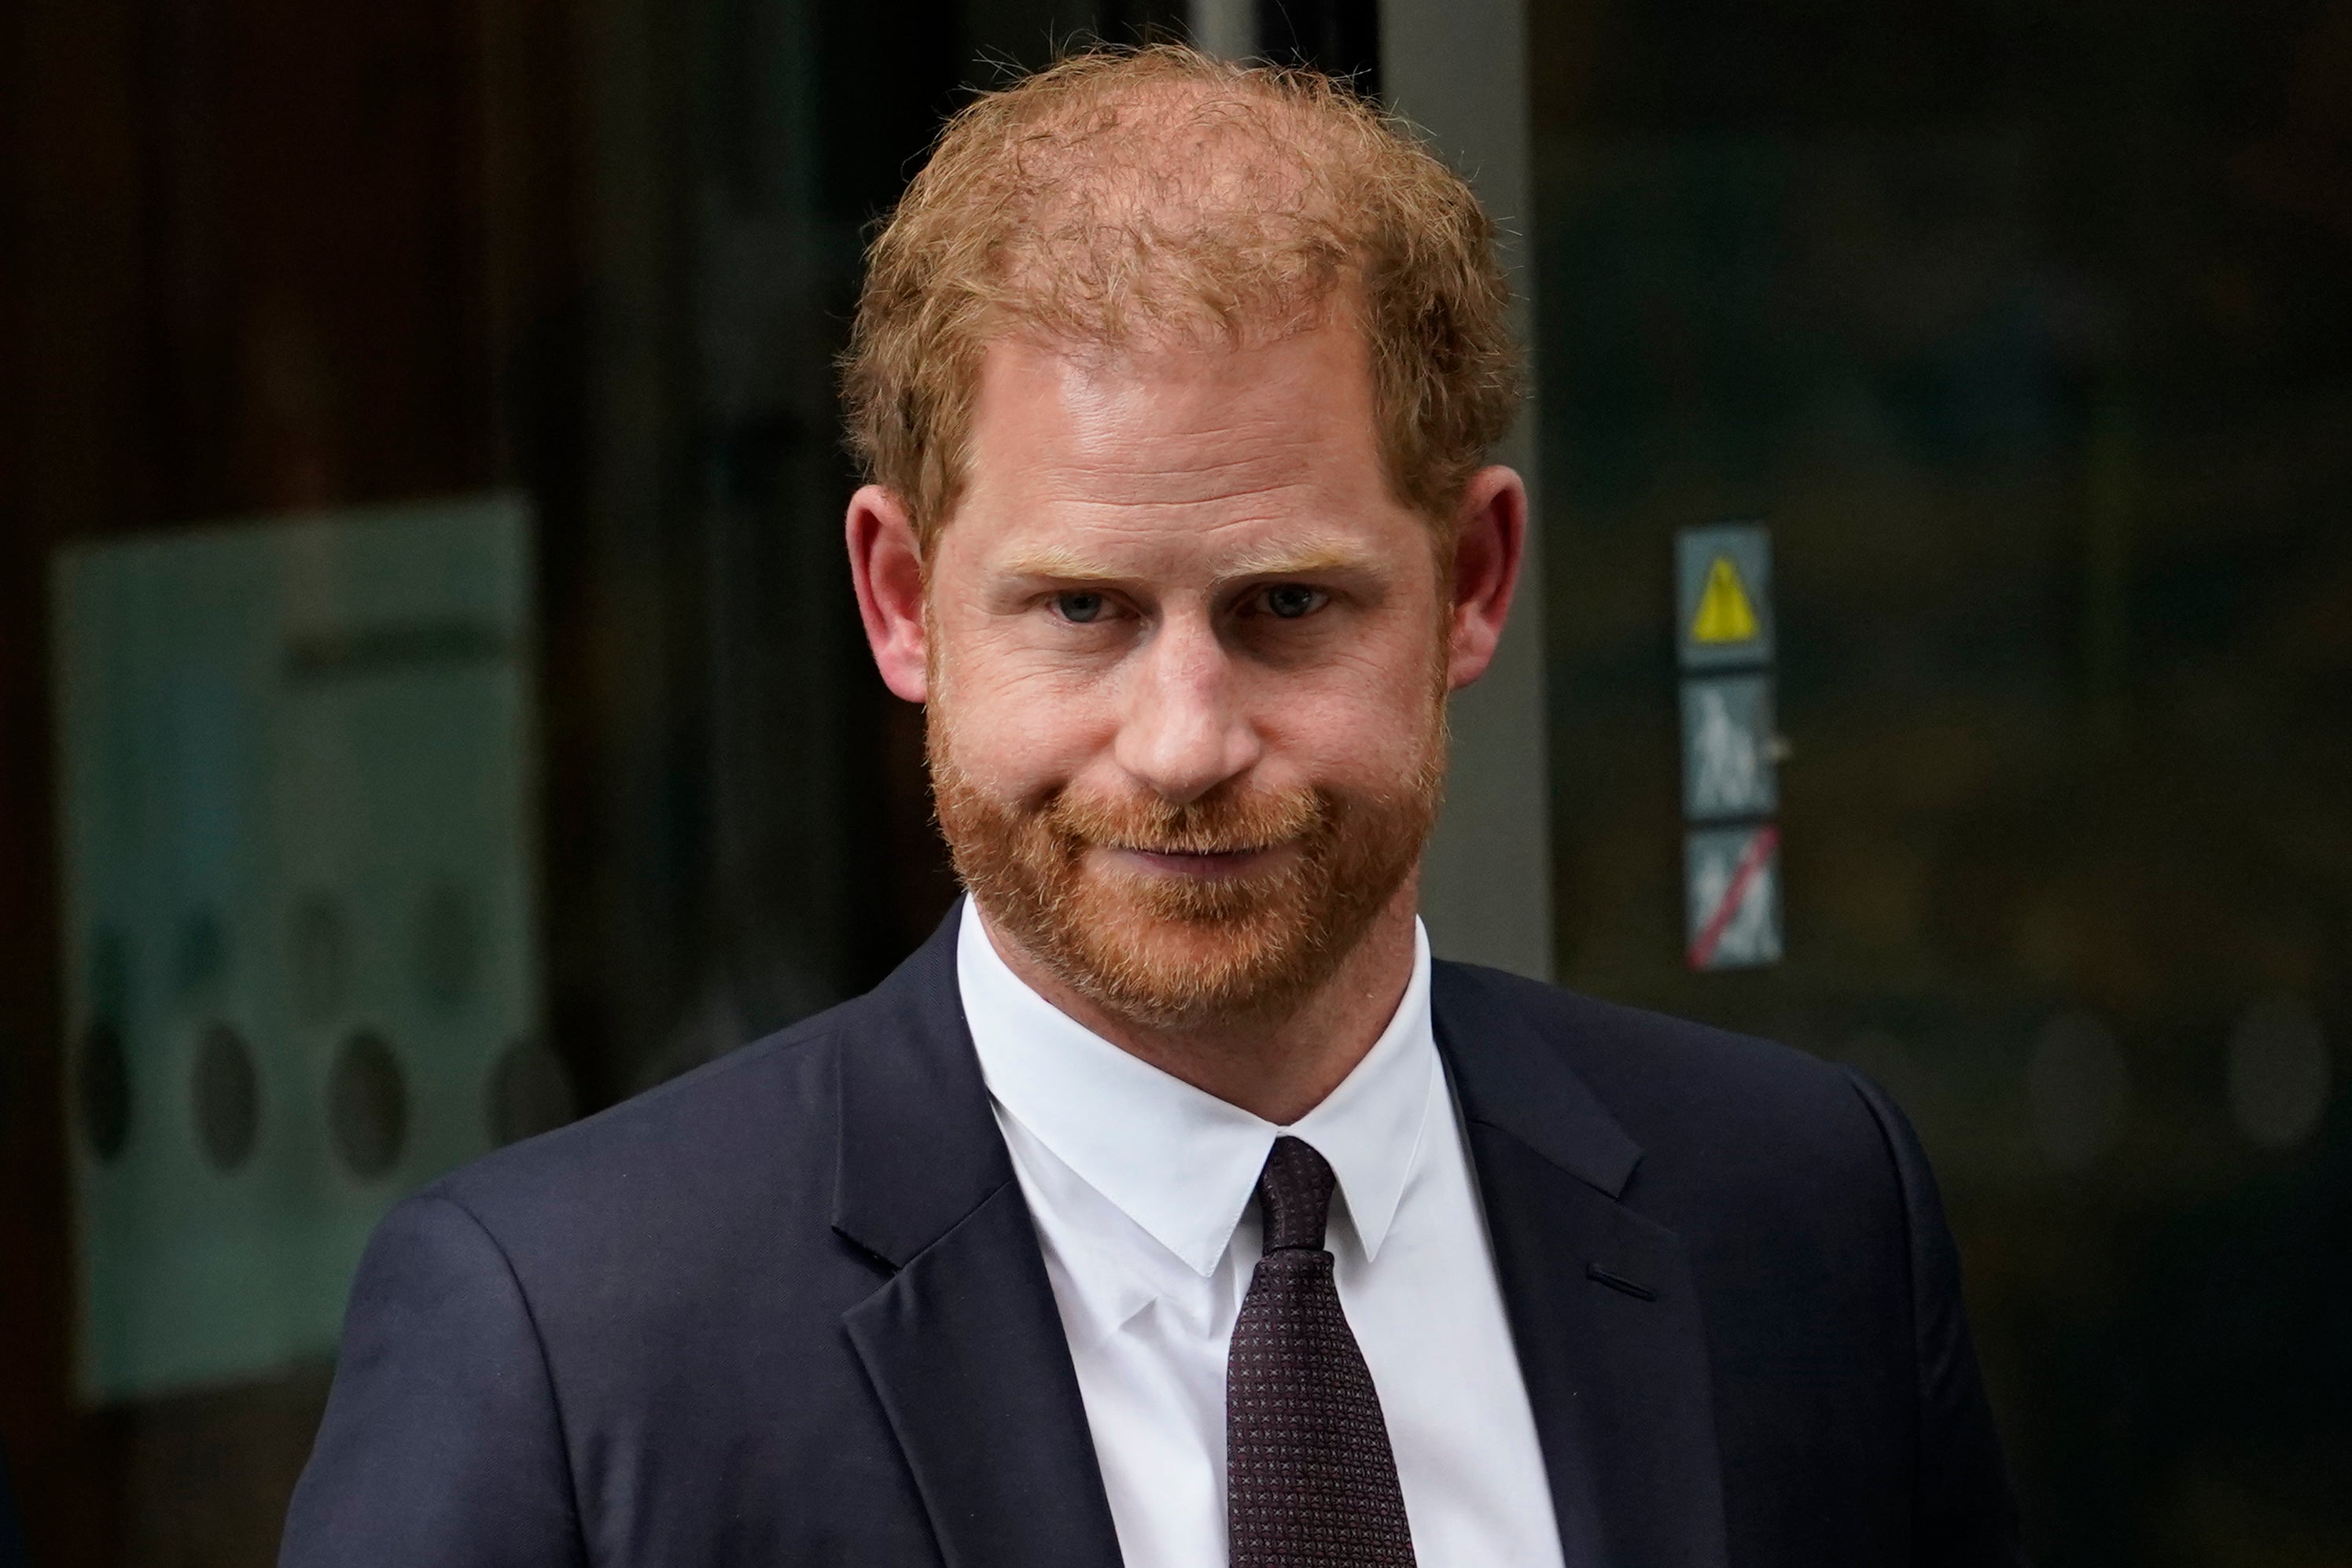 Prince Harry has been awarded ?140,600 in damages for the distress caused by phone-hacking